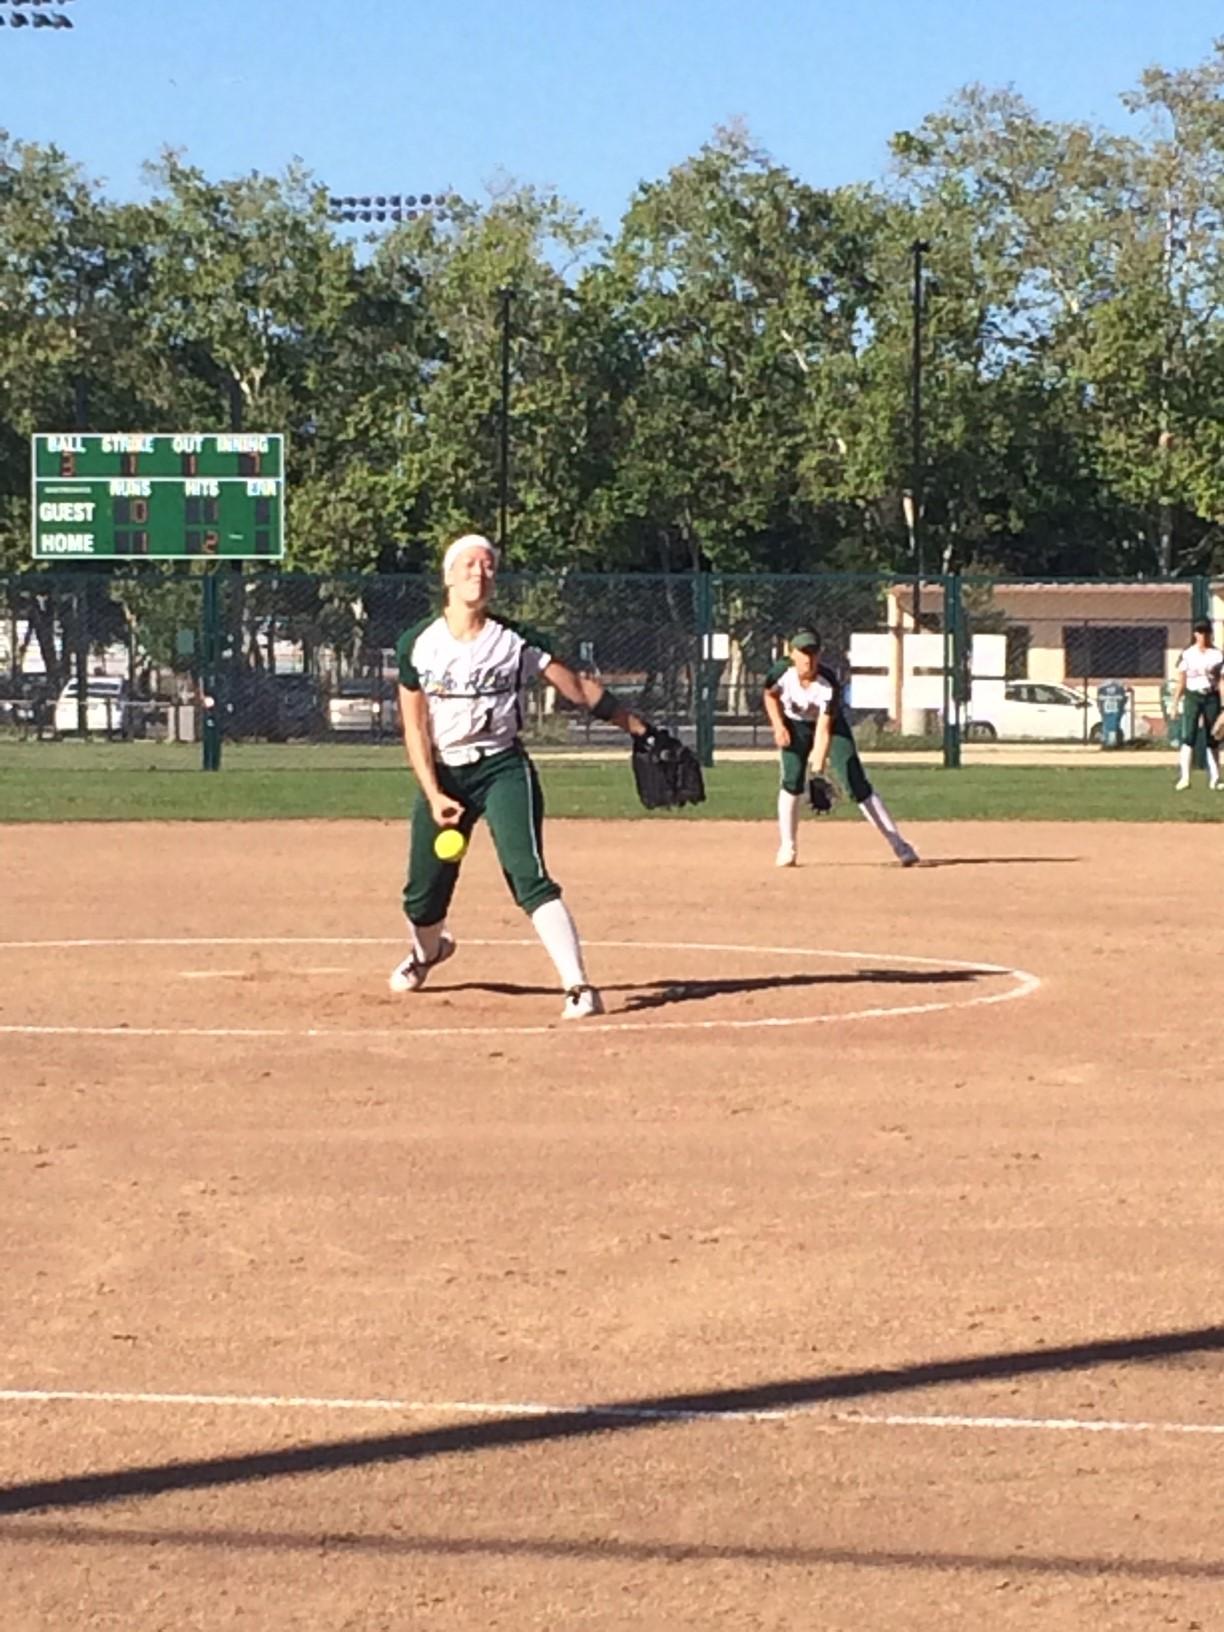 Julia+Saul+%2814%29+throws+a+pitch+in+the+seventh+inning.+She+had+10+strikeouts+in+the+game.